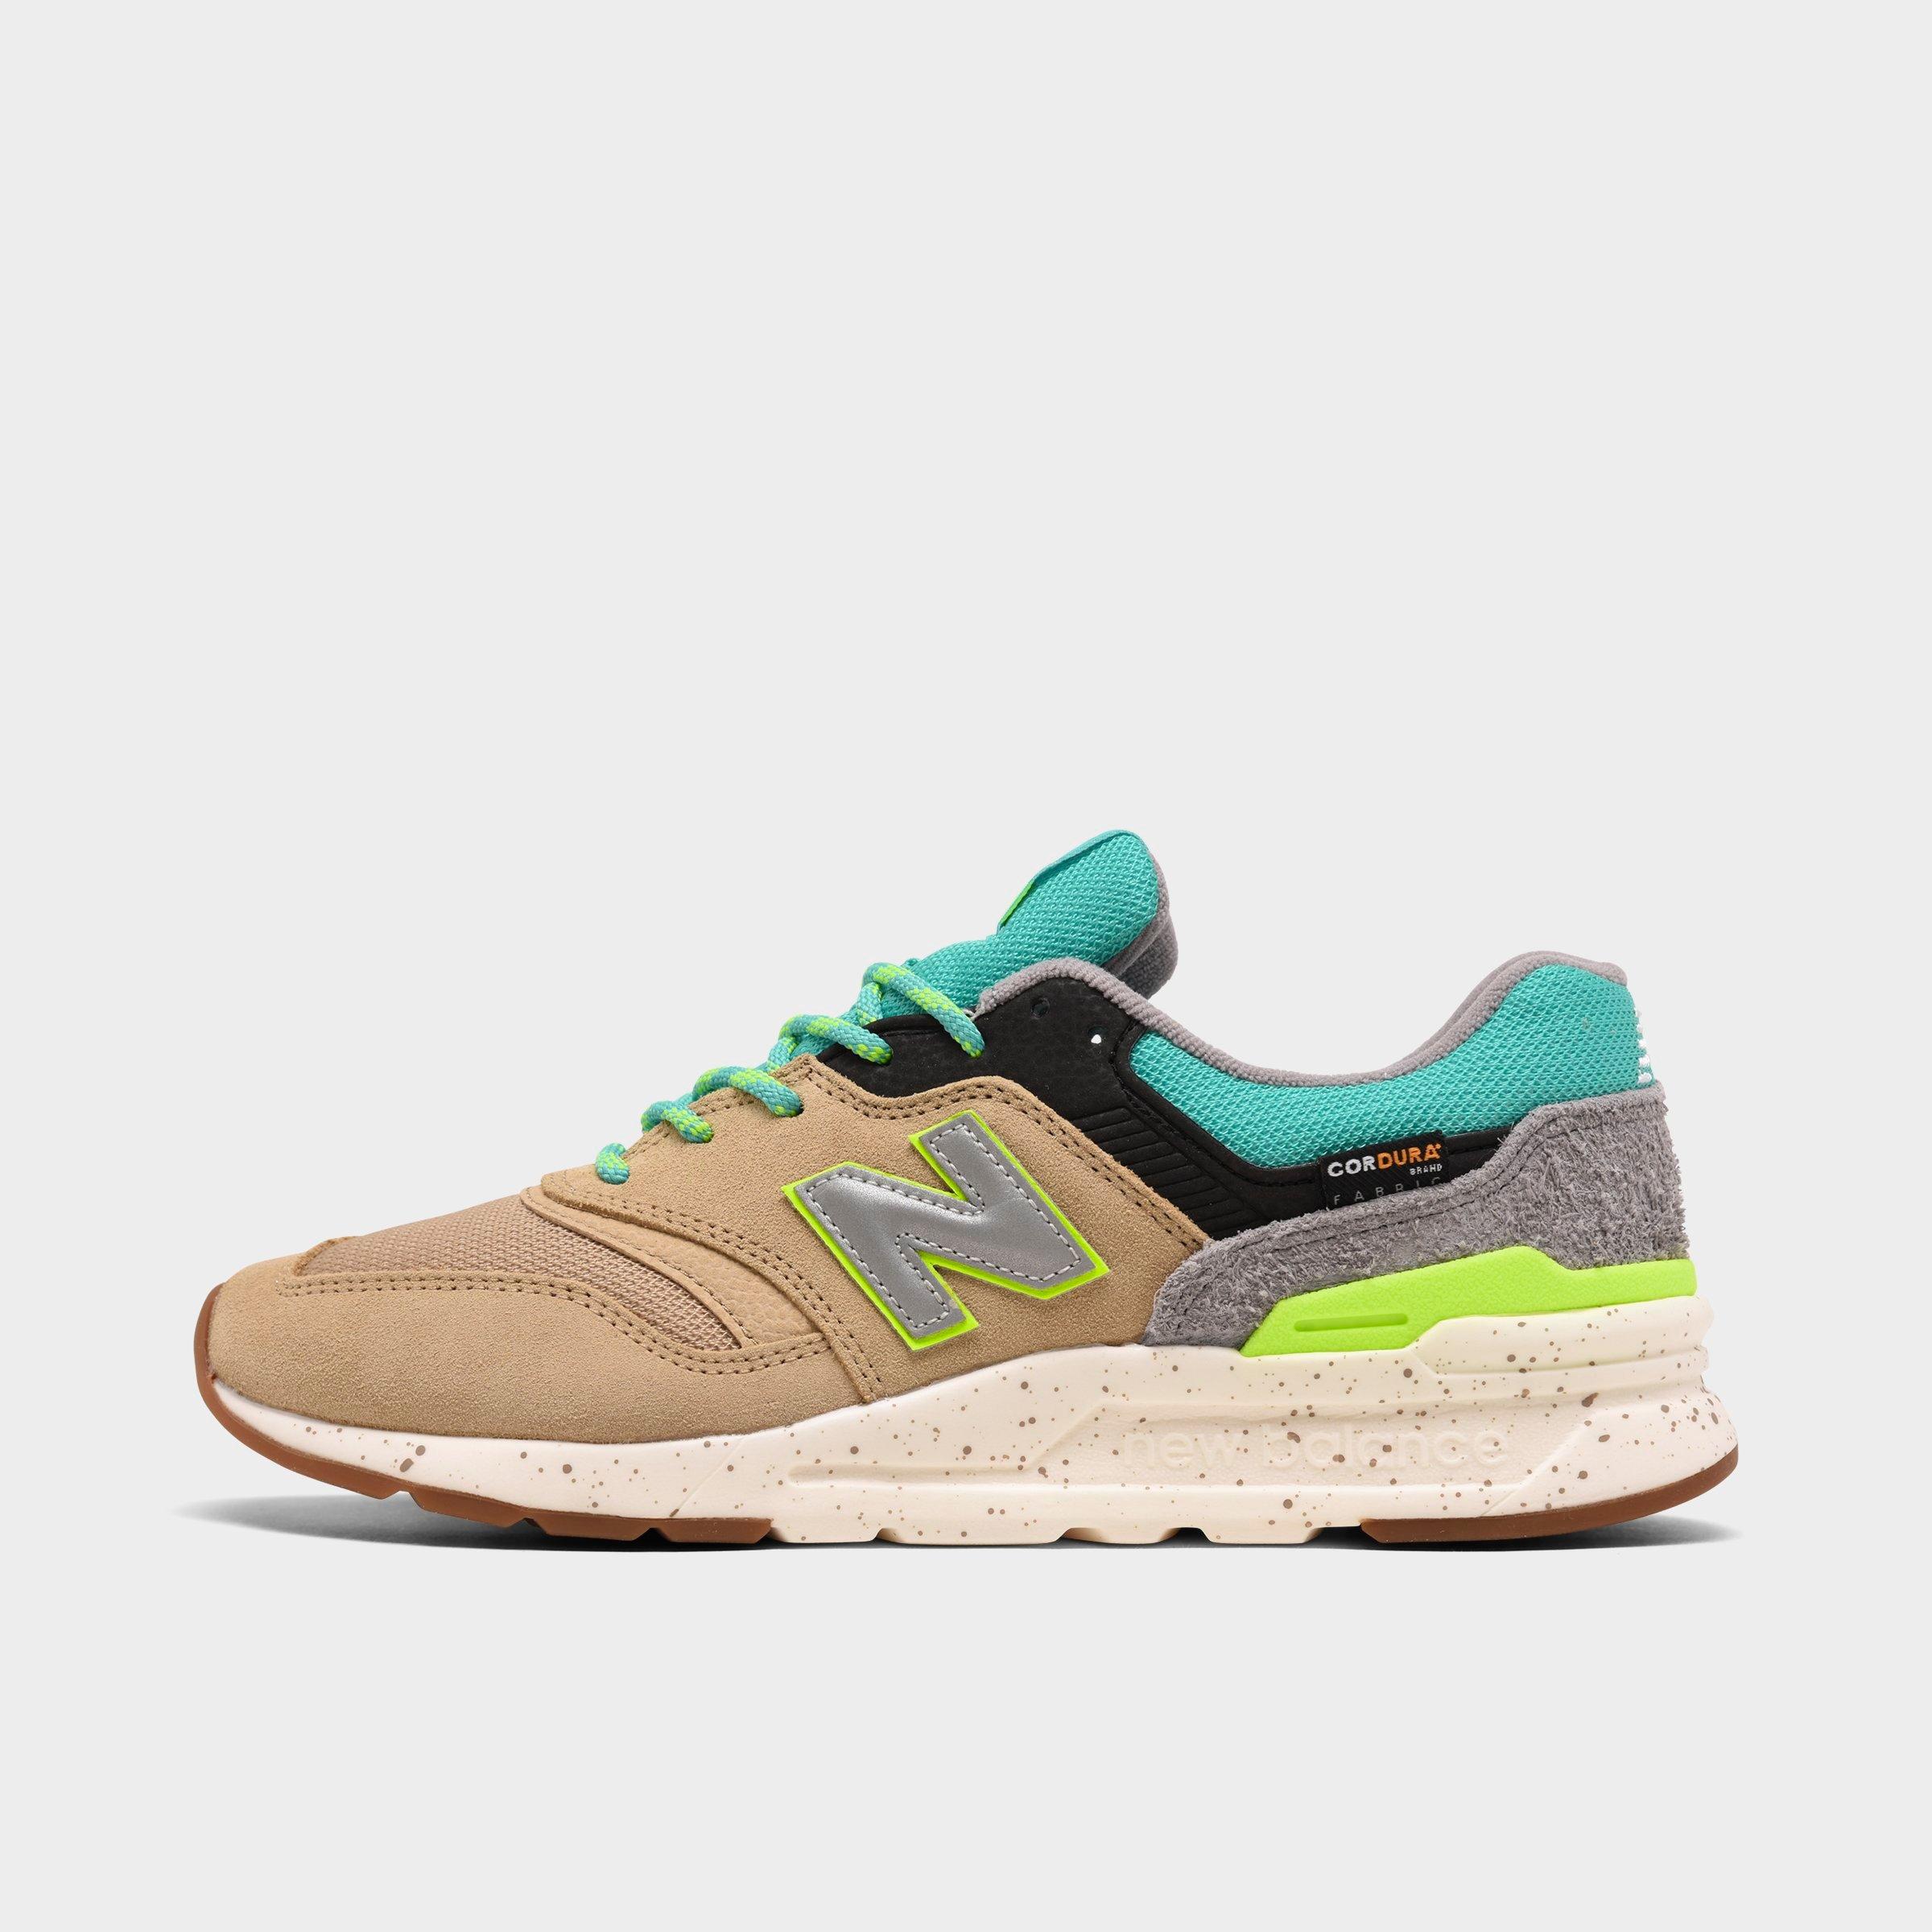 men's new balance 997h casual shoes